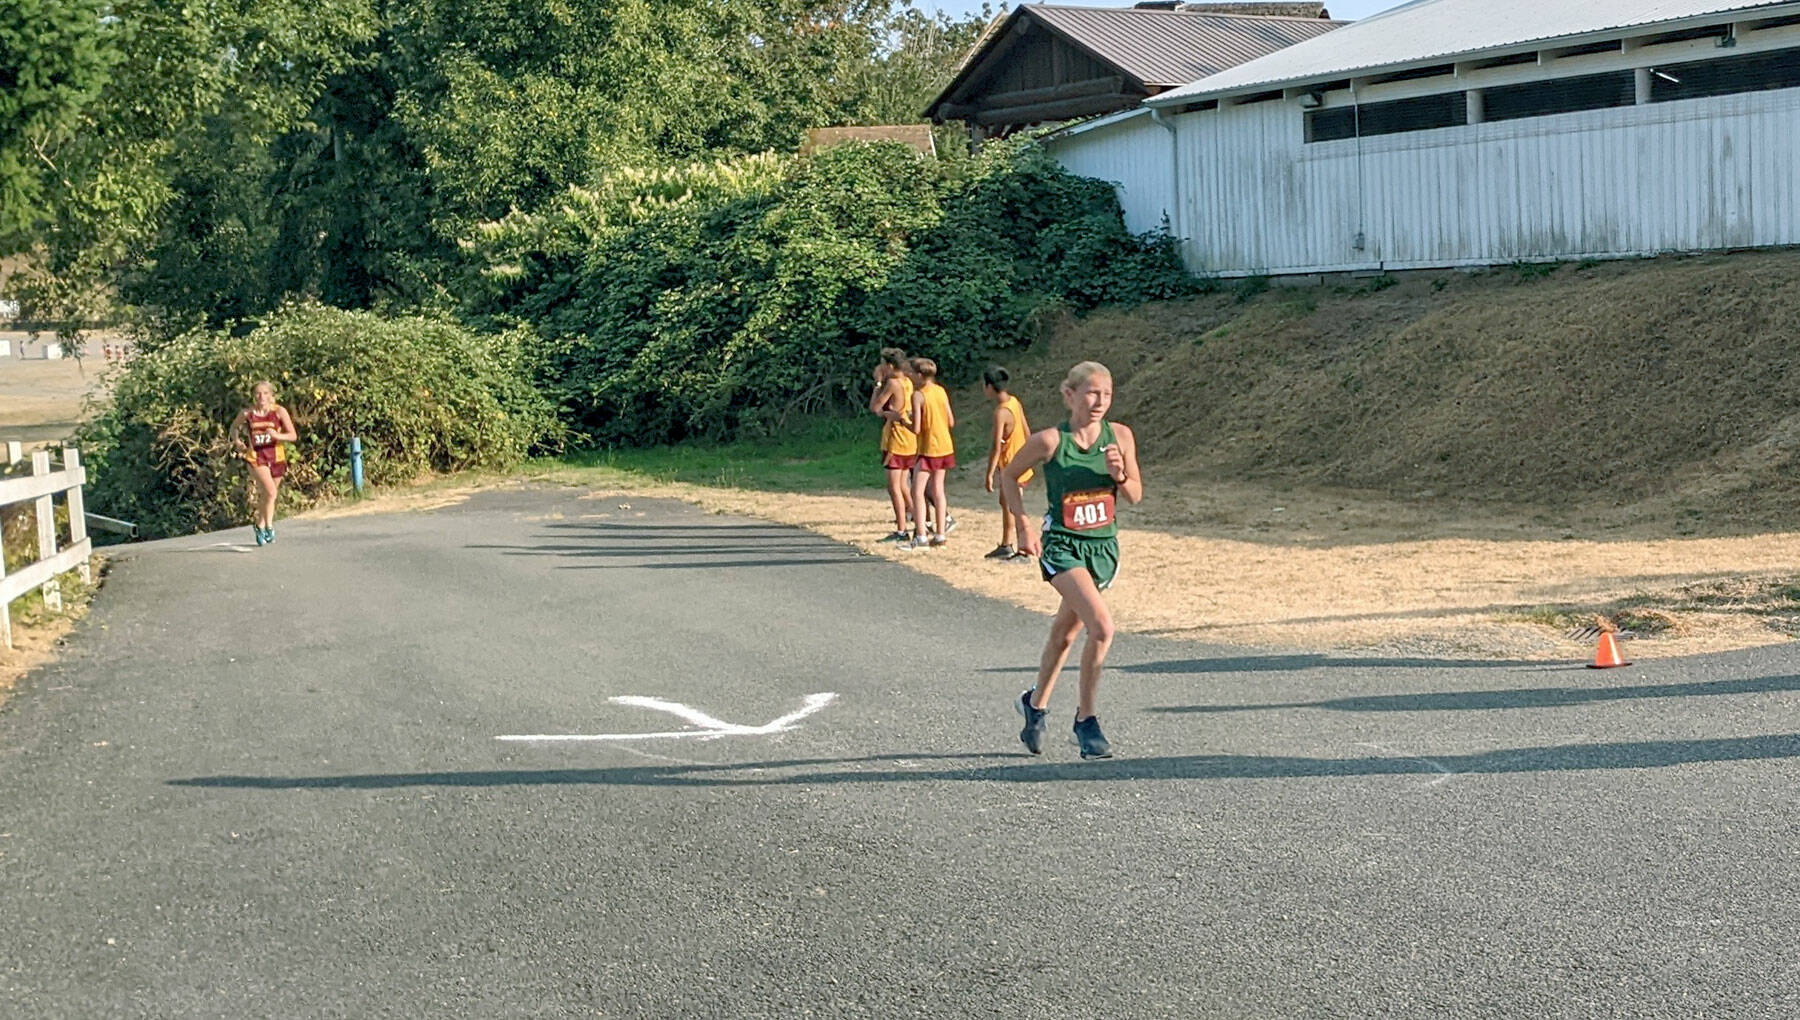 Port Angeles freshman Leia Larson runs up the final hill in a cross country meet at the Kitsap County Fairgrounds. Larson finished fourth in her first-ever varsity meet. (Rodger Johnson/Port Angeles Cross Country)